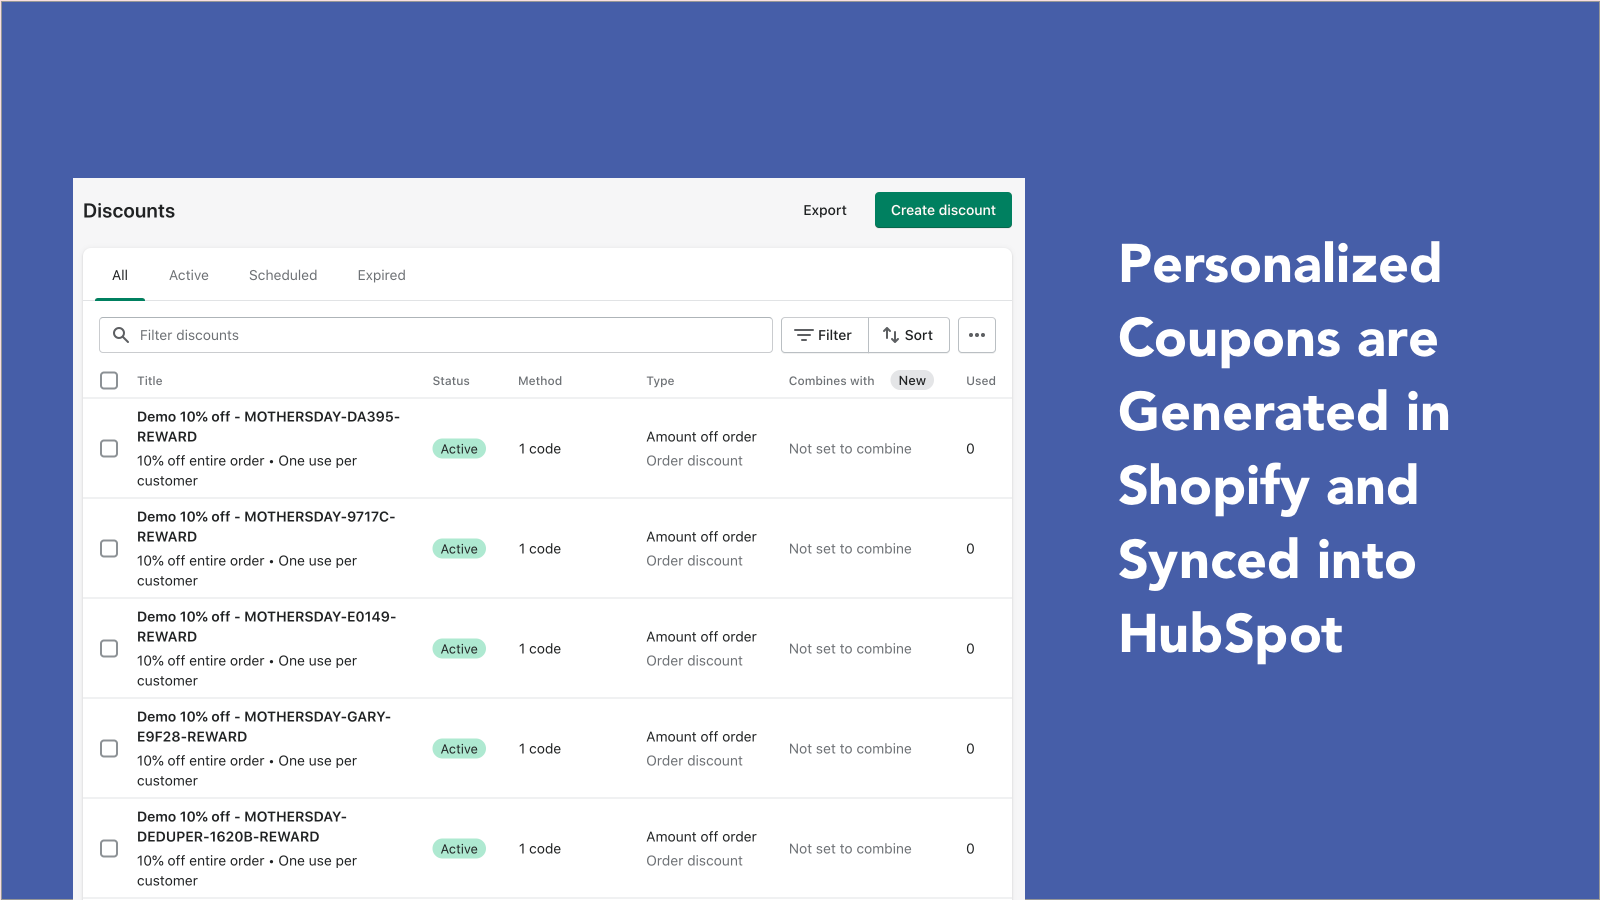 Personalized single use coupons created in Shopify dynamically